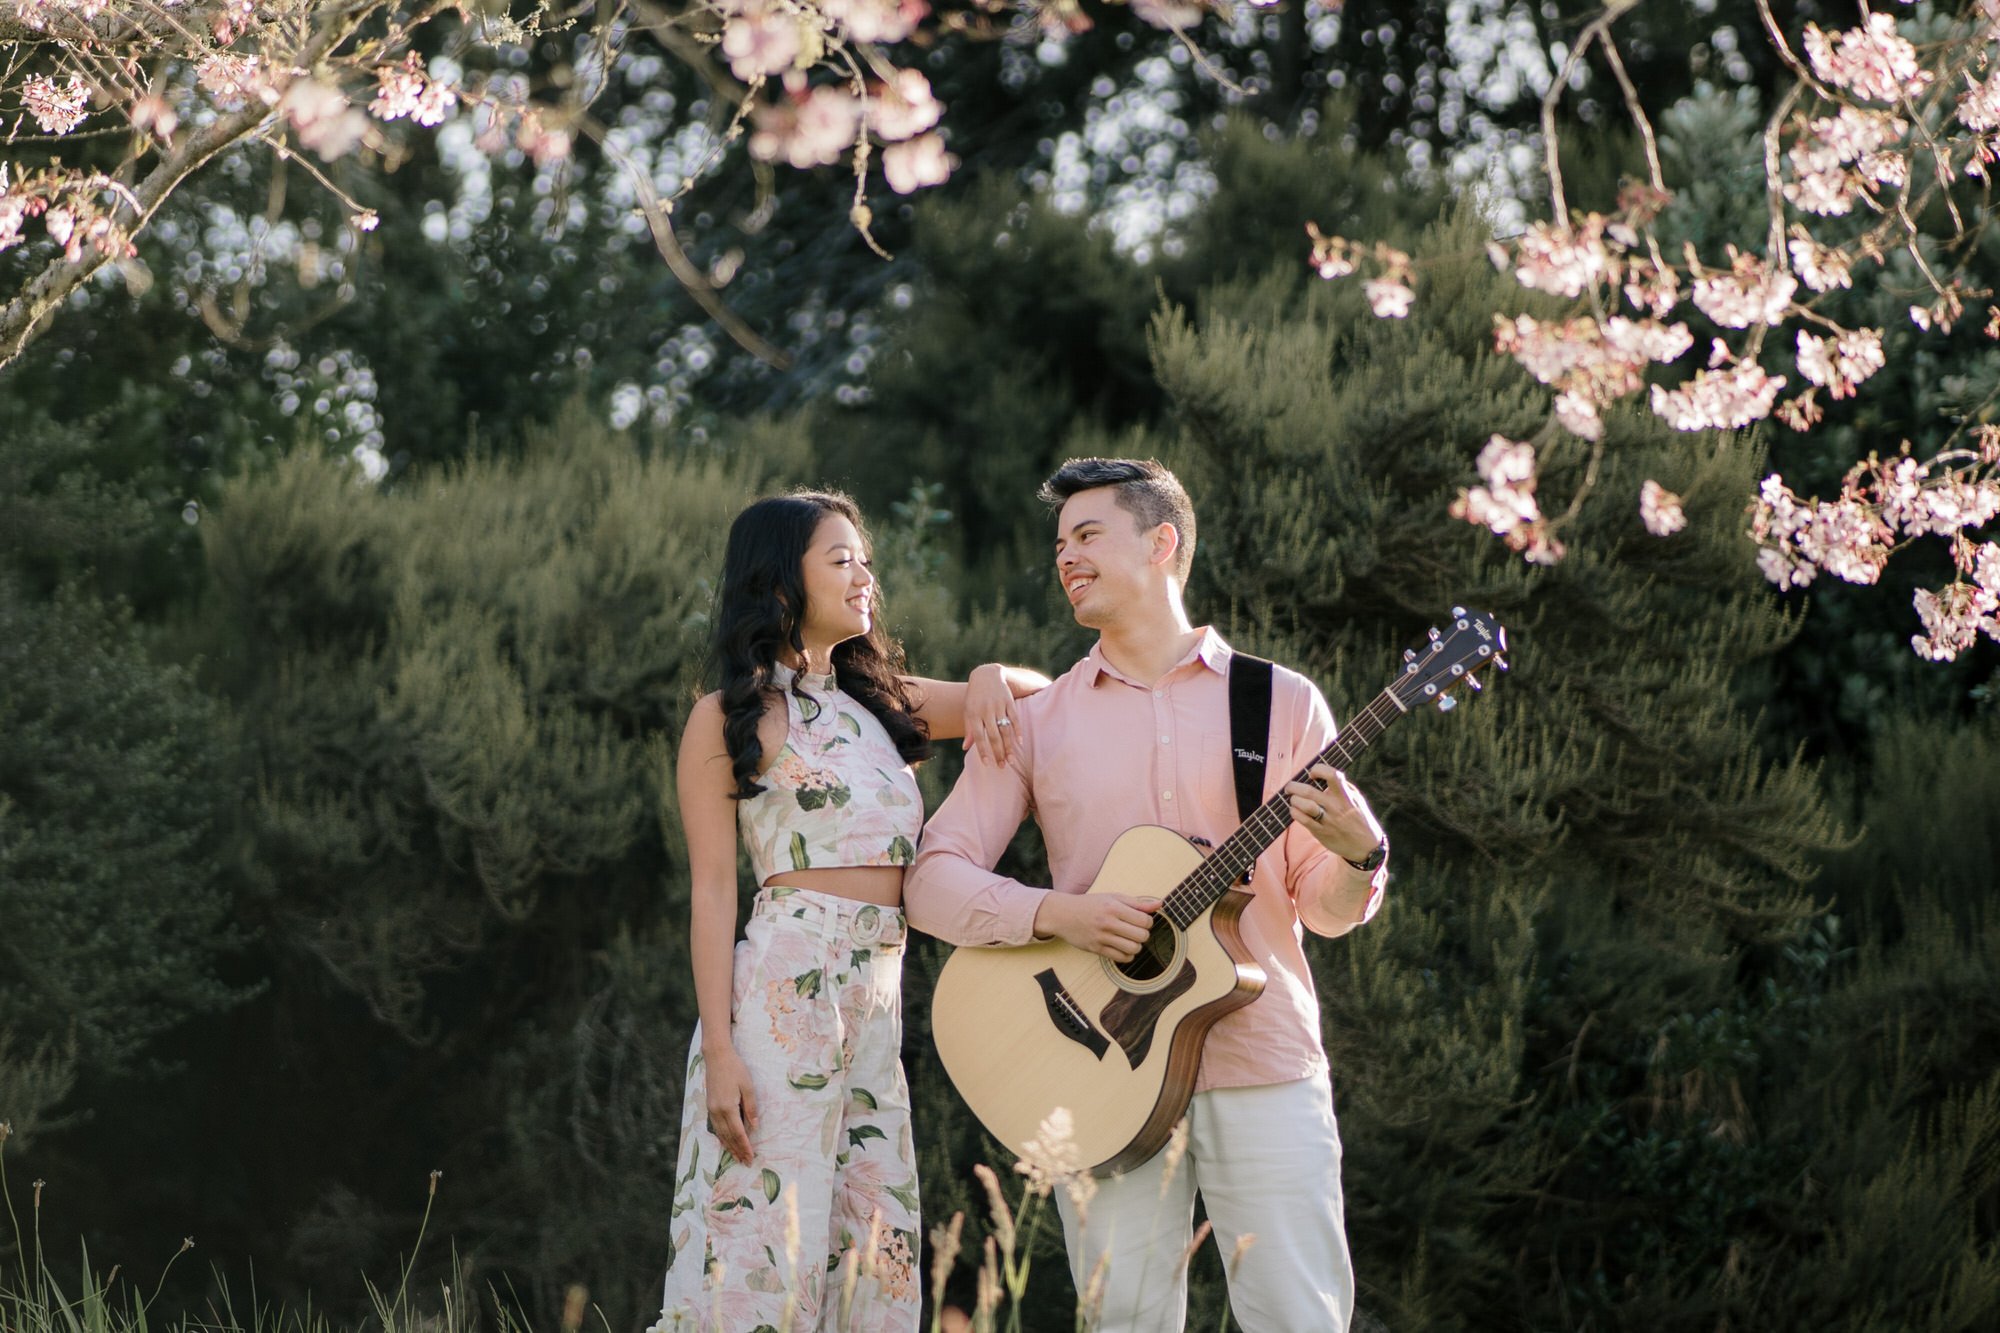 nate-and-thea-singers-duo-2023-top-auckland-wedding-phtographer-photography-videography-film-new-zealand-NZ-best-band-cherry-blossom-botanical-garden-engagement-elopement-dear-white-productions (54).jpg